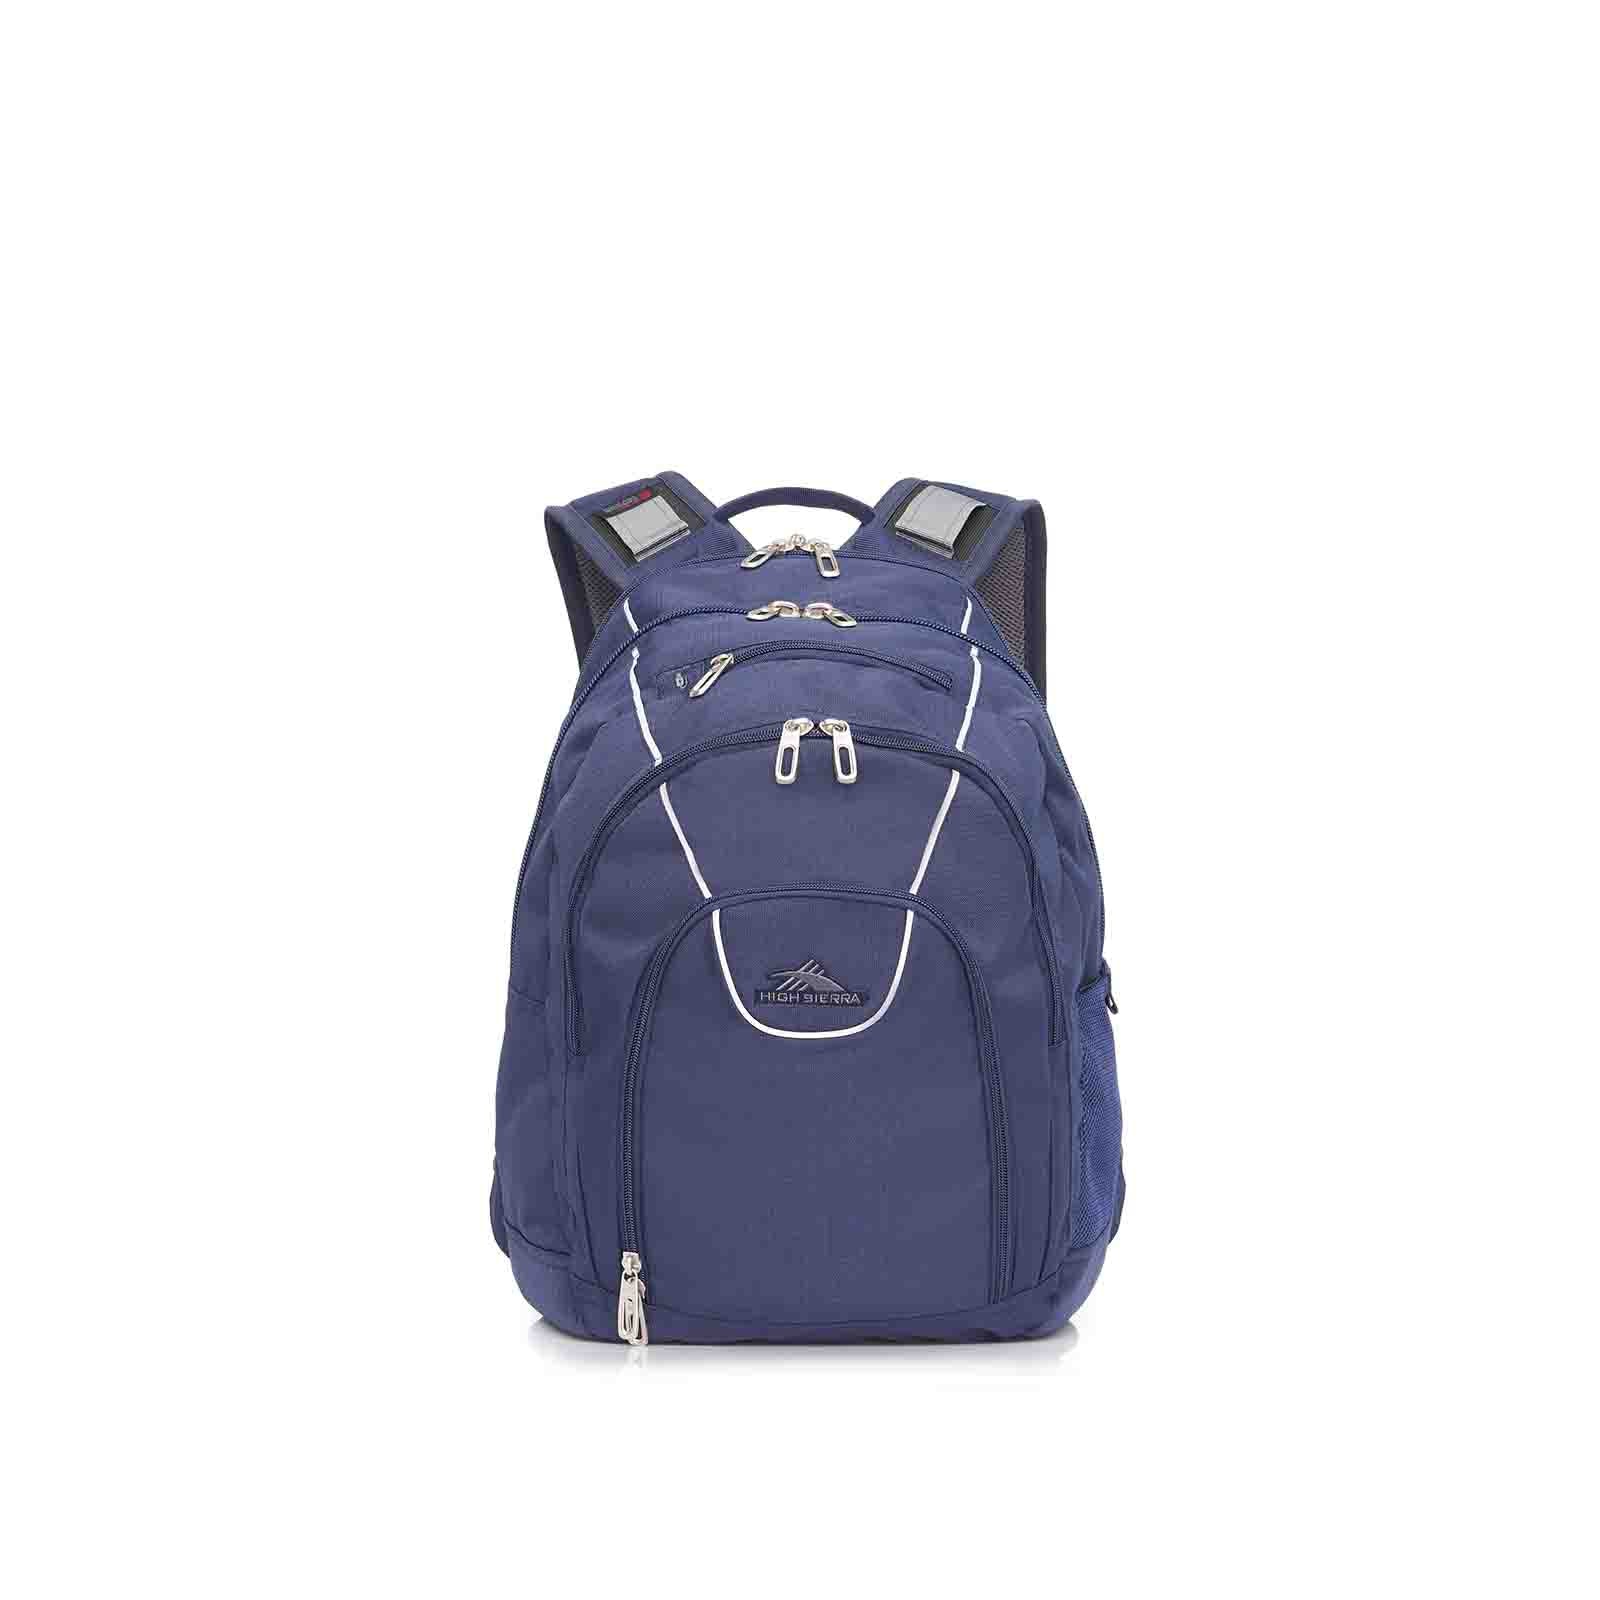 High-Sierra-Academy-3-Eco-15-Inch-Laptop-Backpack-Marine-Blue-Front